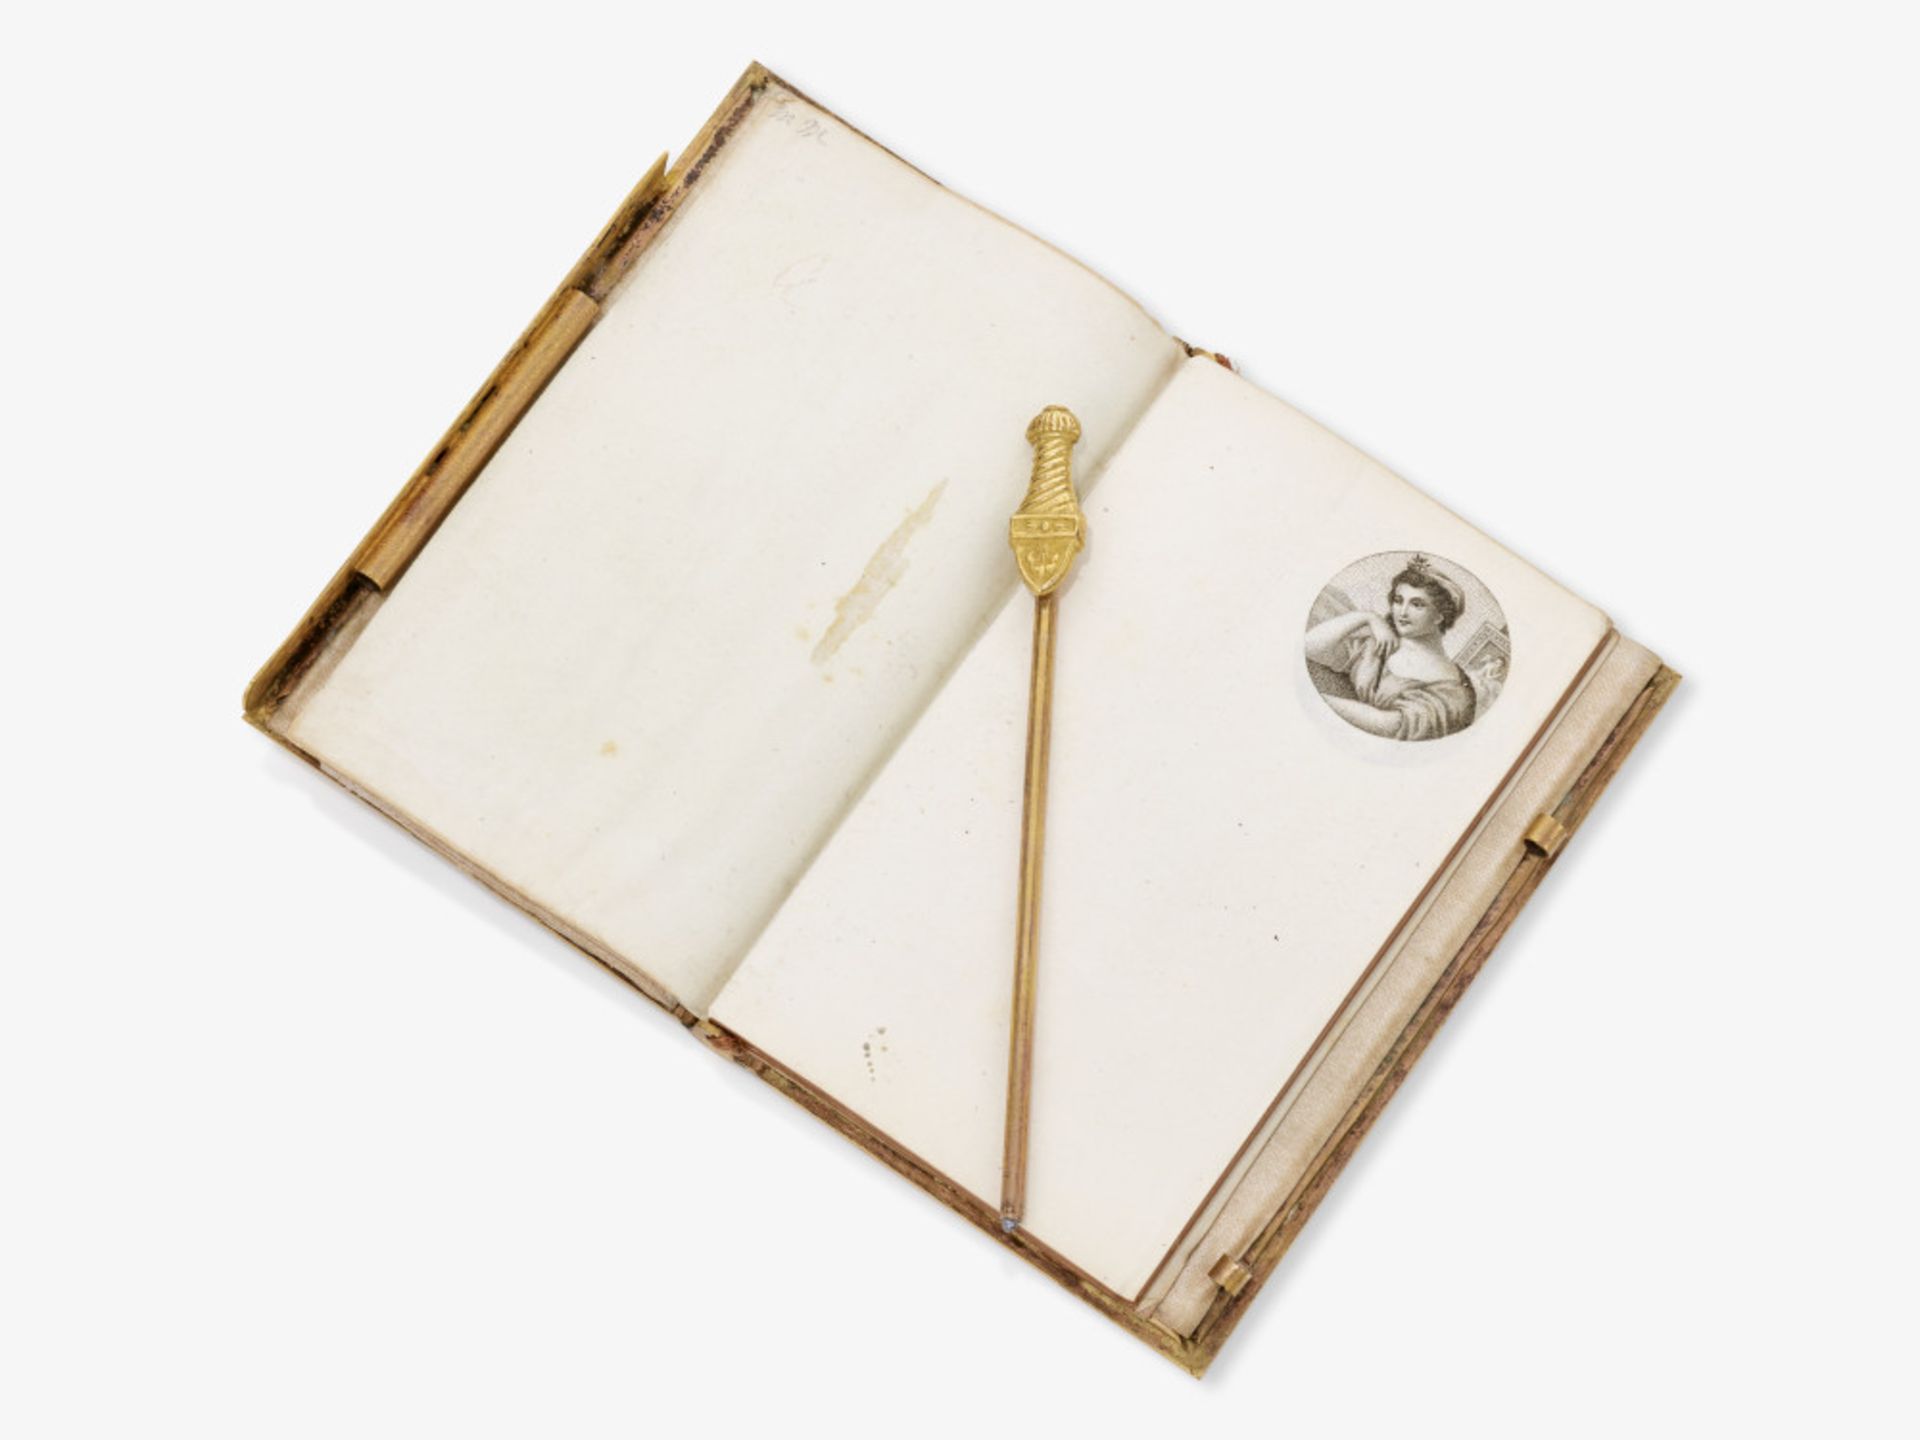 A notebook with days of the week and wallet as souvenir - France, late 19th century - Image 2 of 3